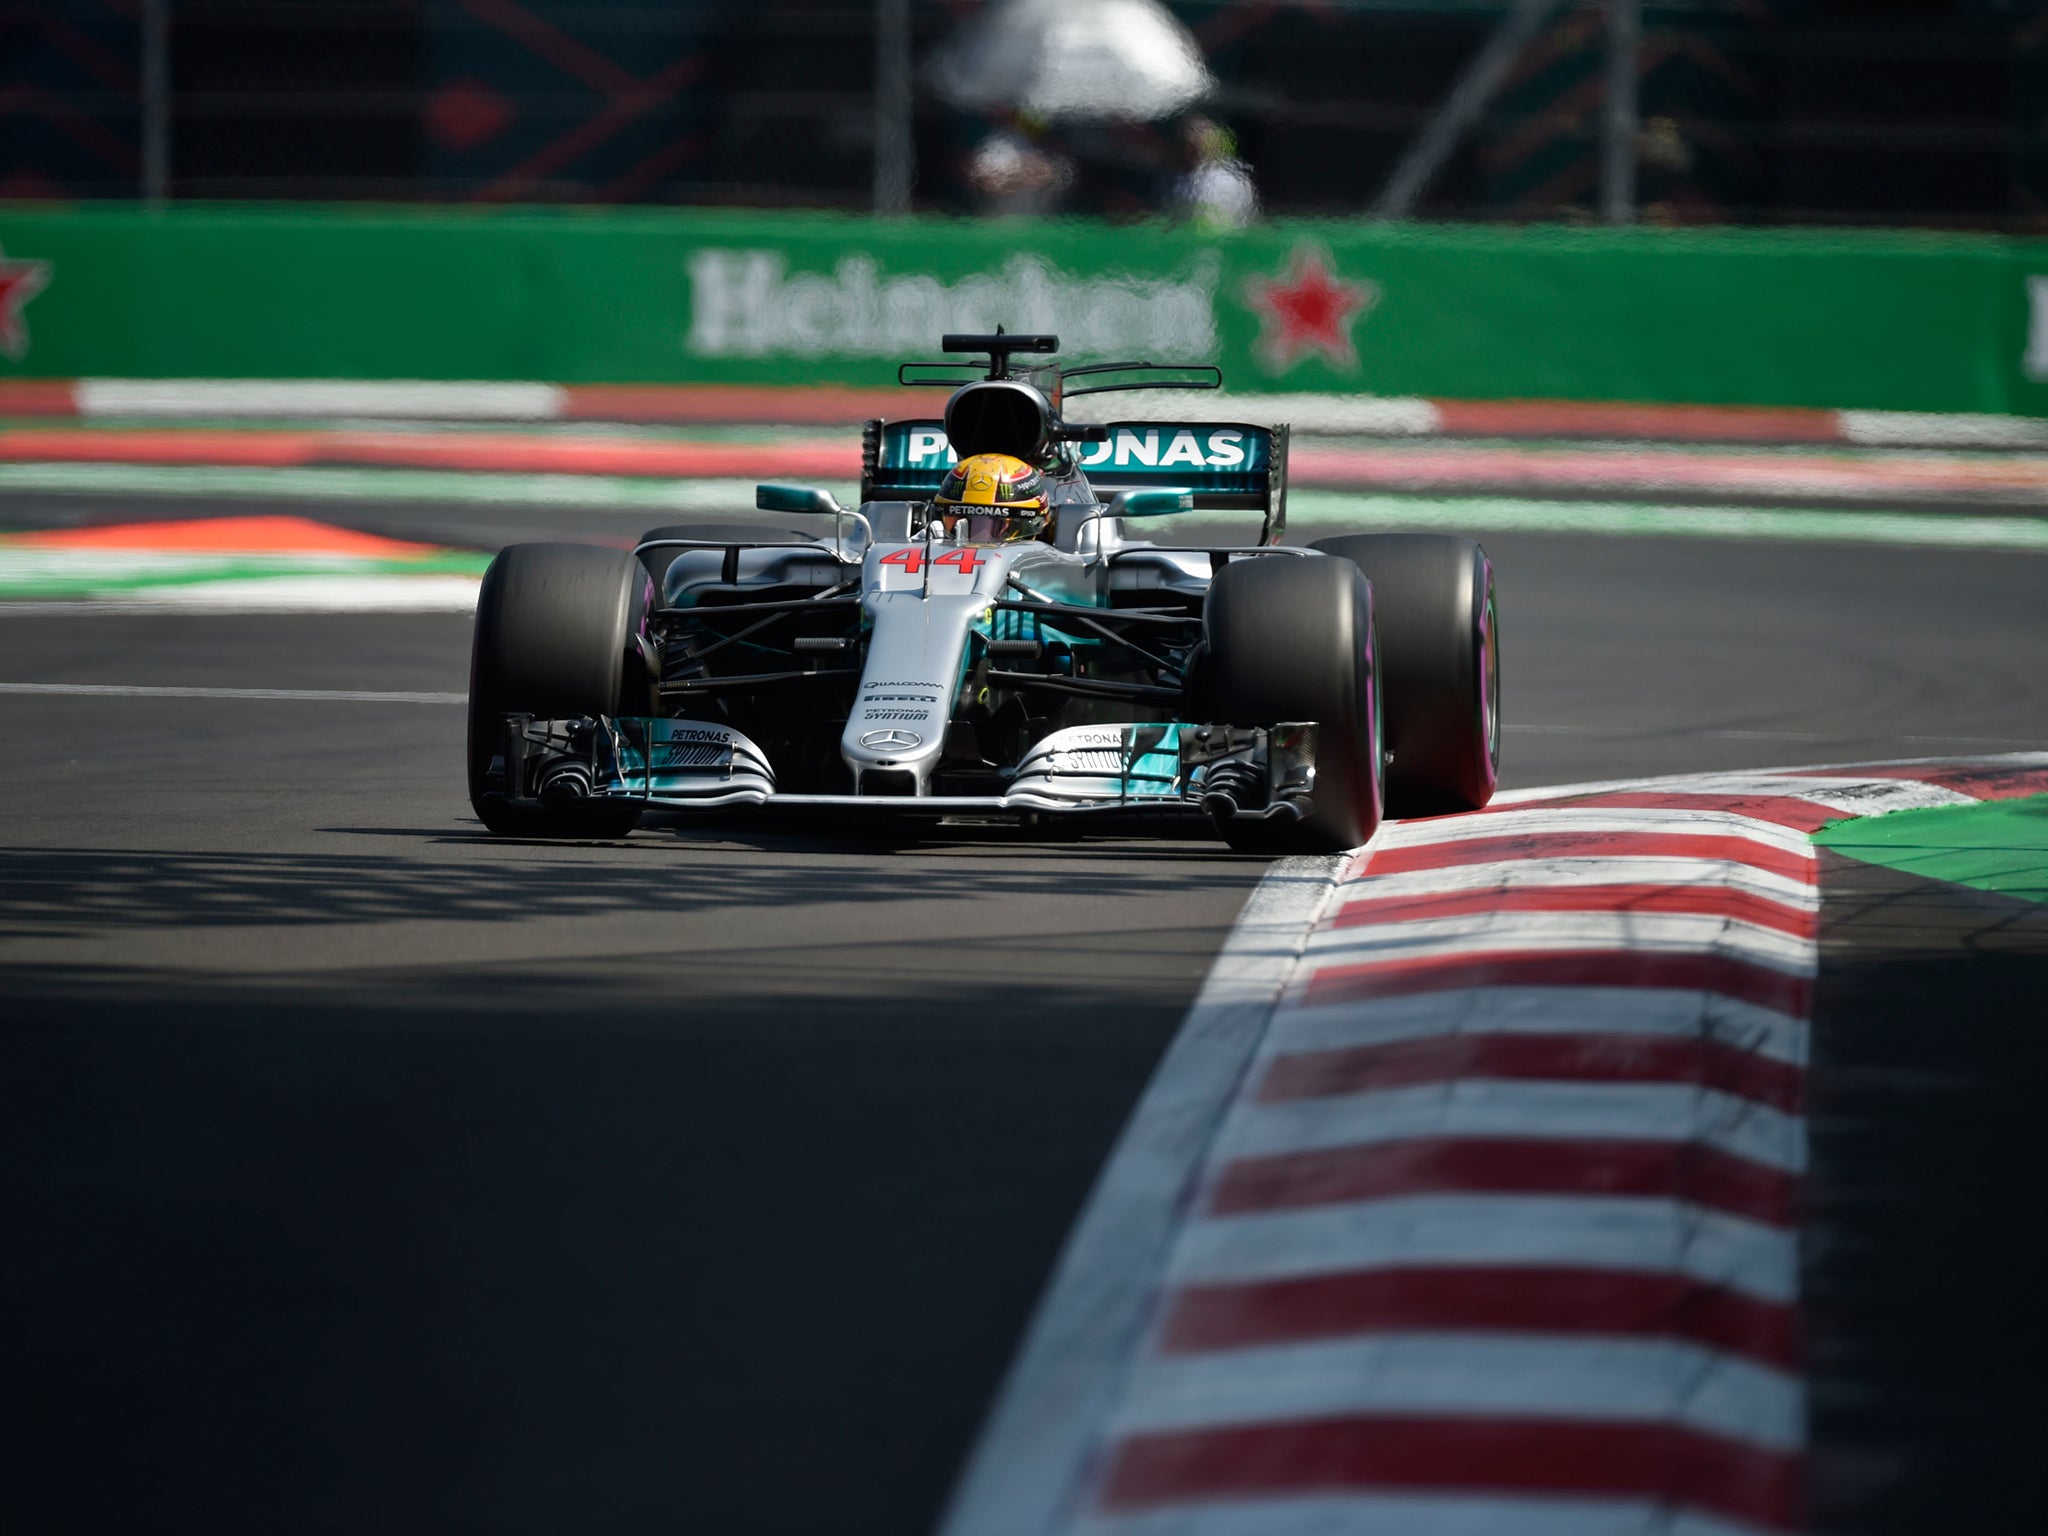 Hamilton starts third but only has to finish fifth to win the title